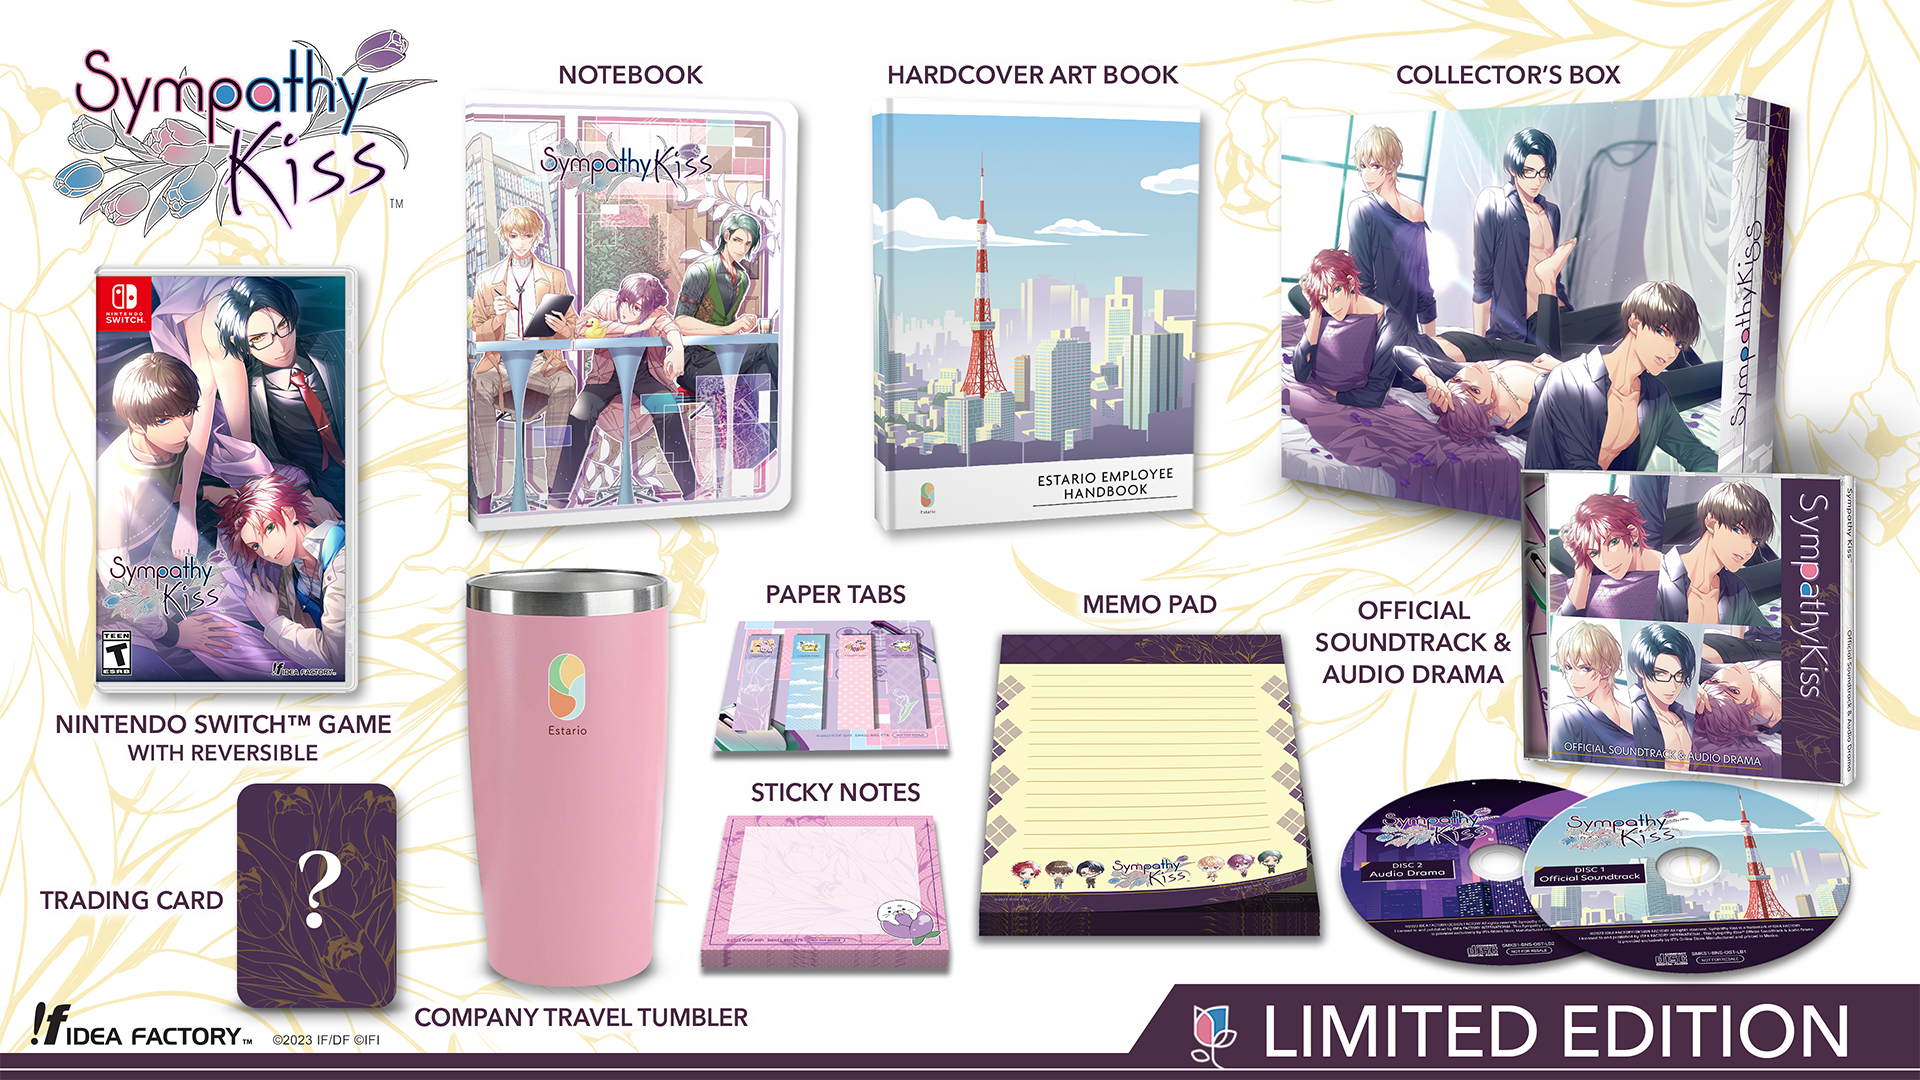 The Sympathy Kiss Limited Edition includes the game with a reversible cover sleeve, a hardcover art book, the official soundtrack plus audio drama, a company travel tumbler, an Estario stationary set, a collector's box, and an exclusive trading card.